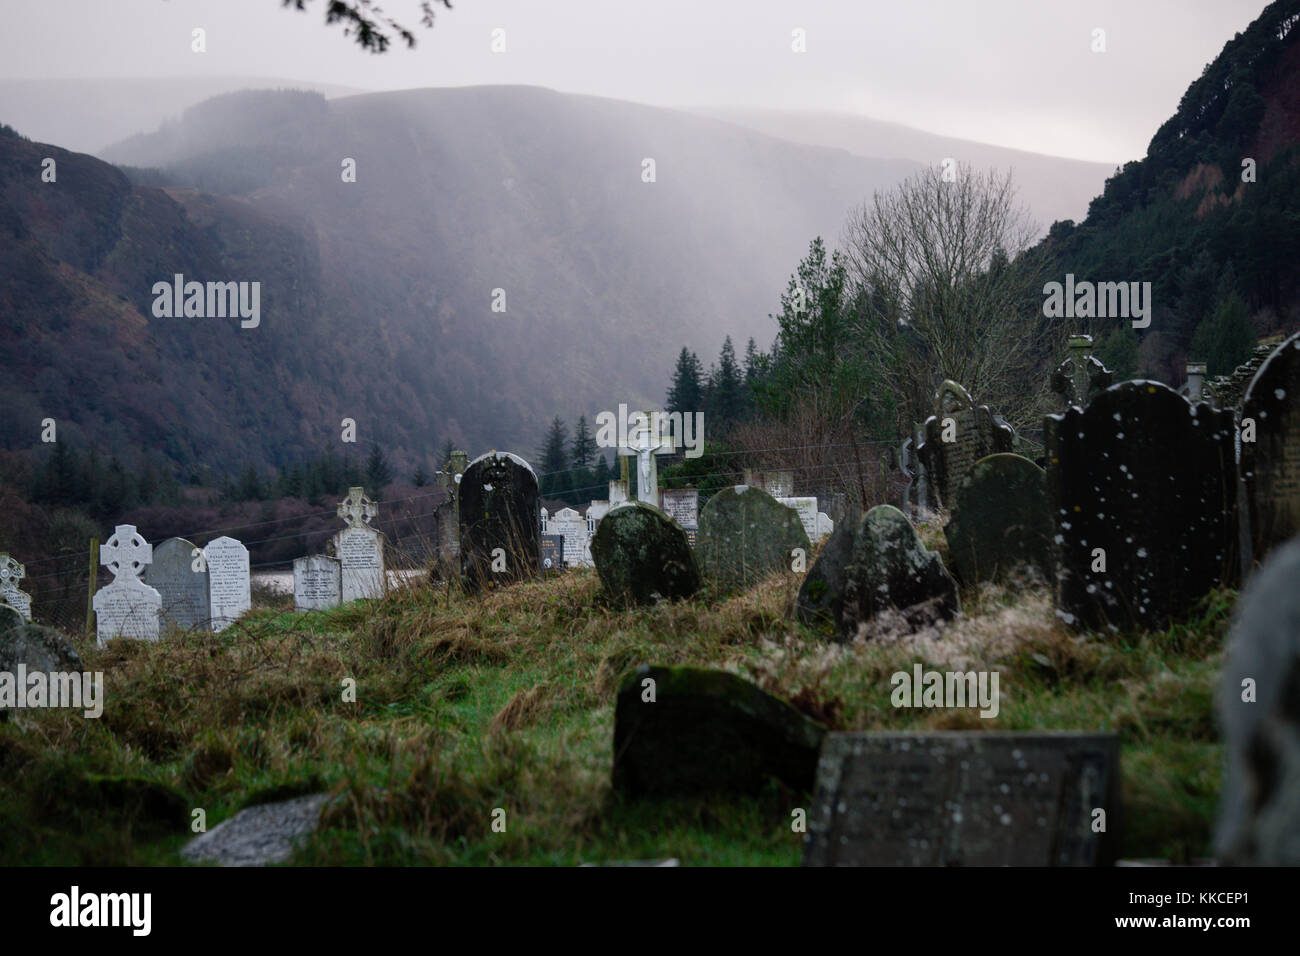 Graveyard with old tombstones in lower valley at the Glendalough Monastic Site, Co. Wicklow, Ireland Stock Photo